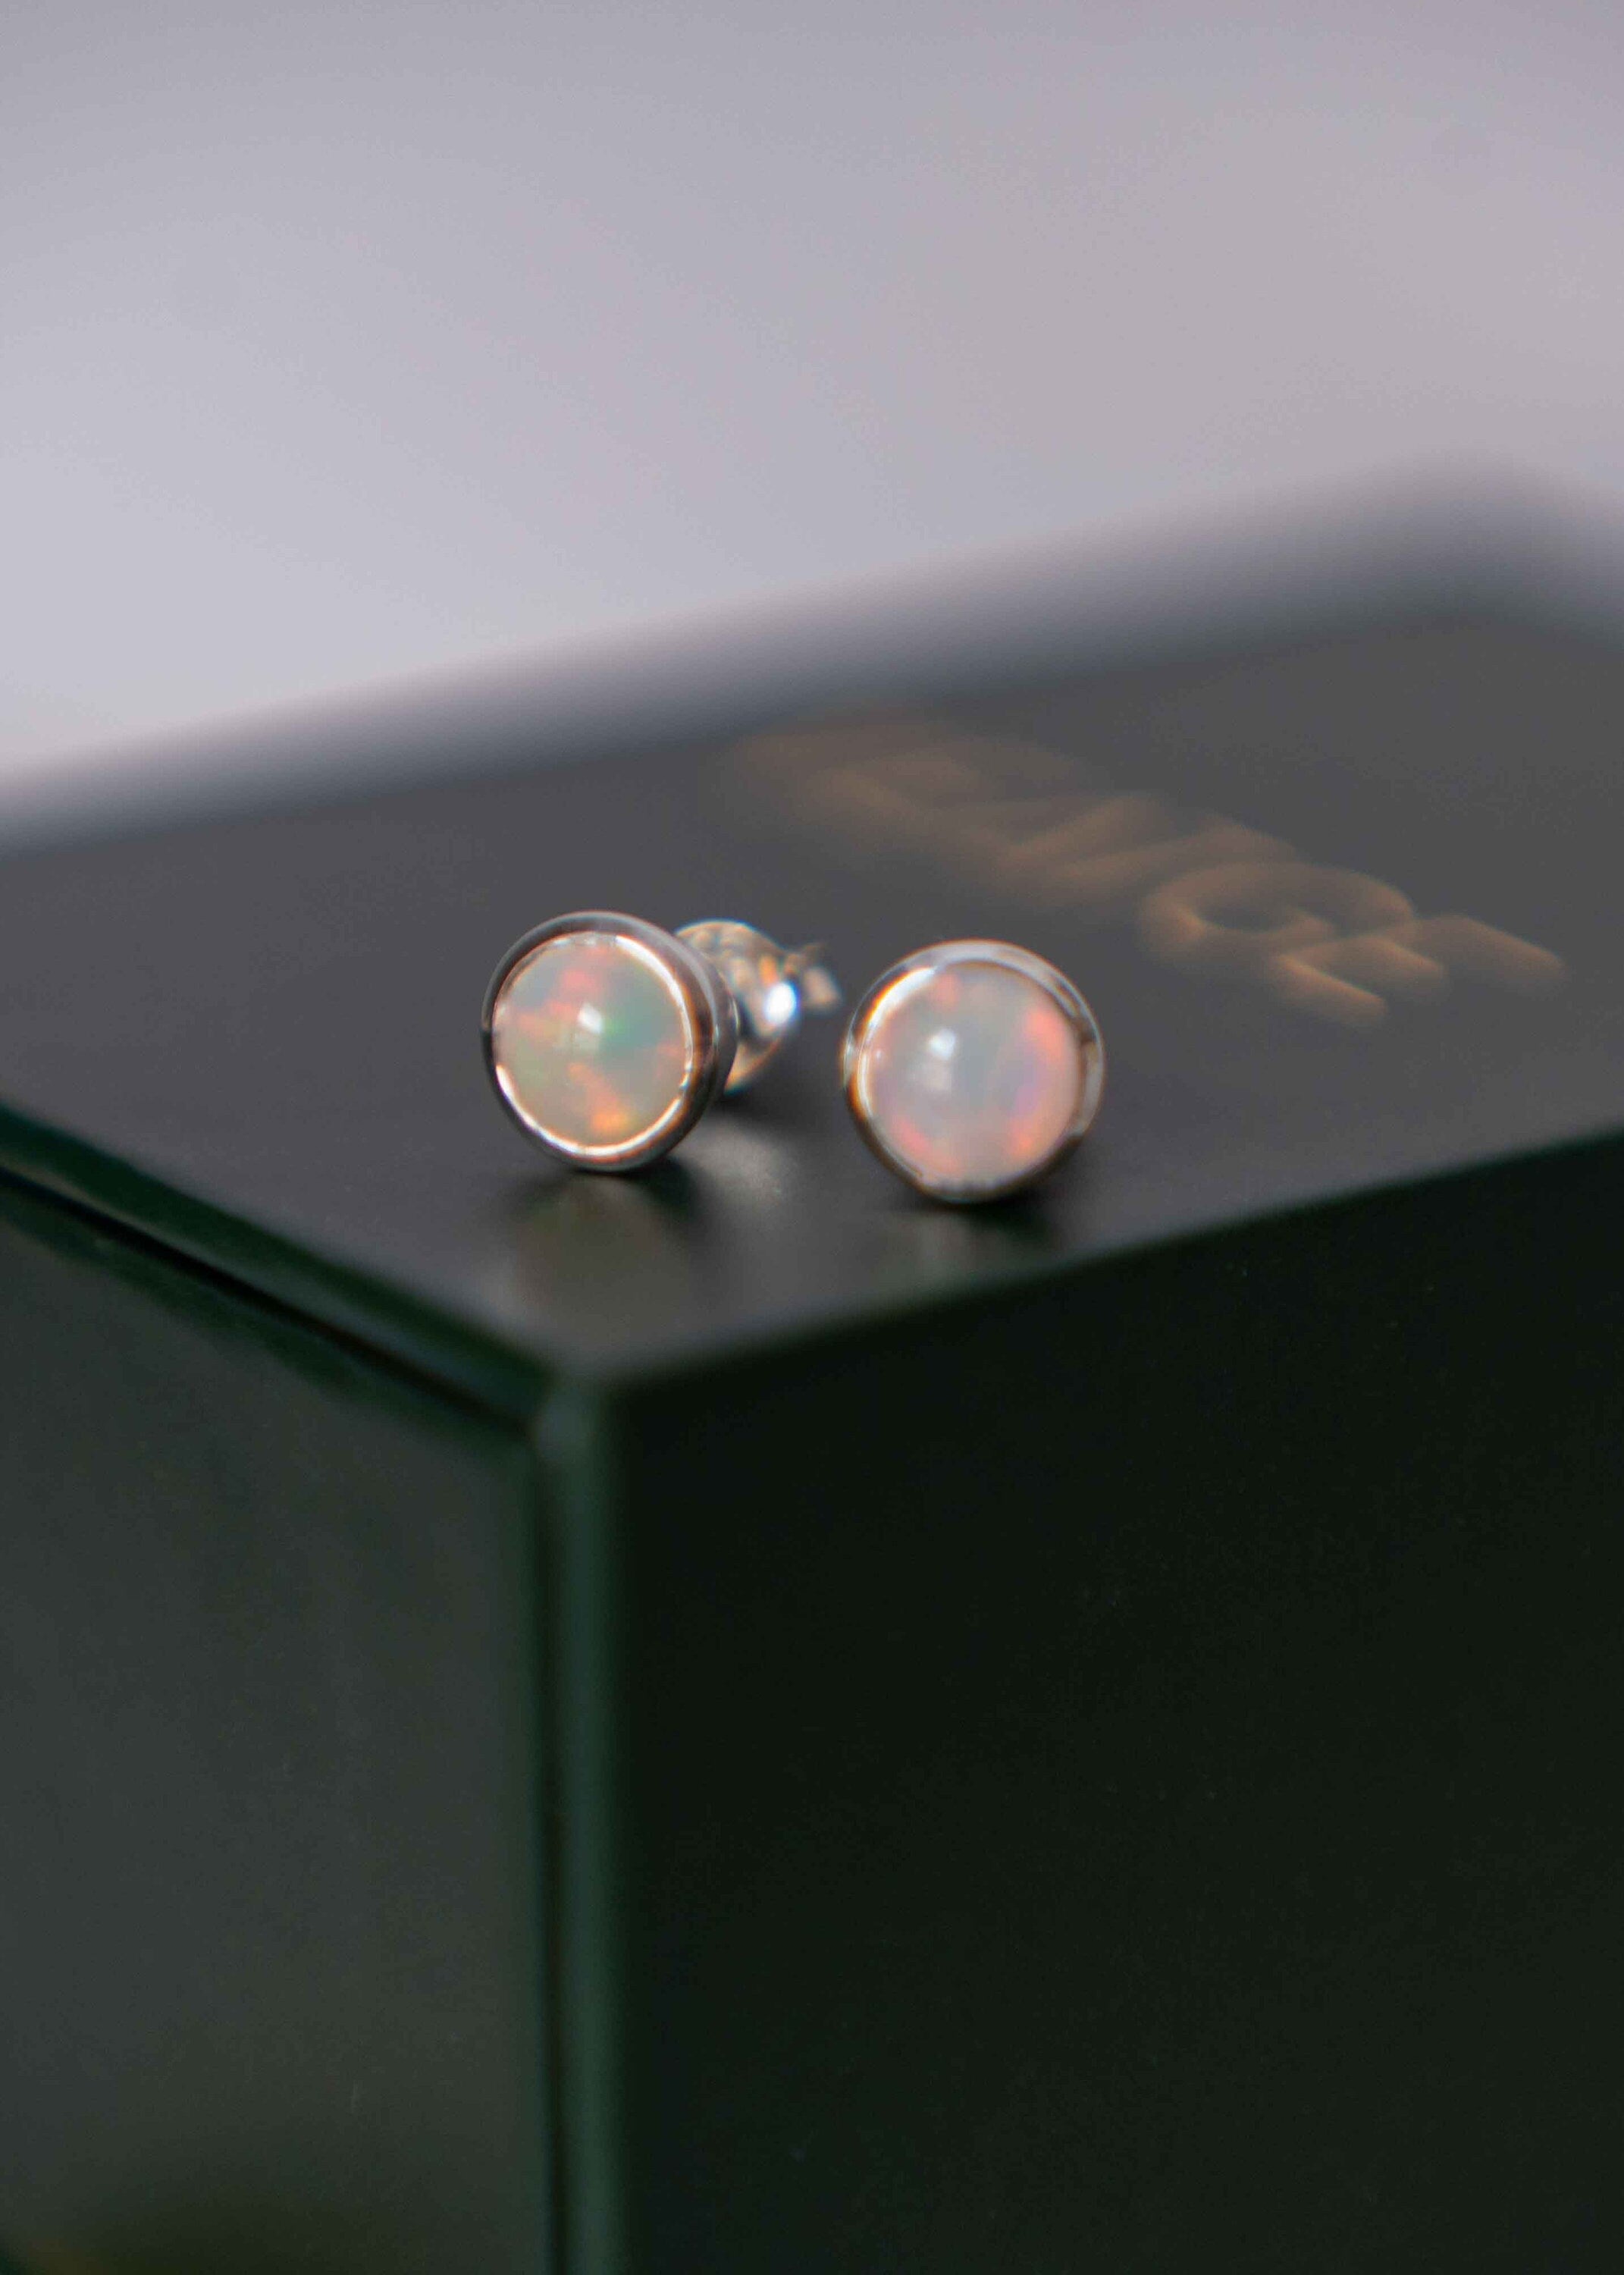 Genuine Real Opal Studs in Sterling Silver 925 October Birthstone Birthday Gifts for Women 